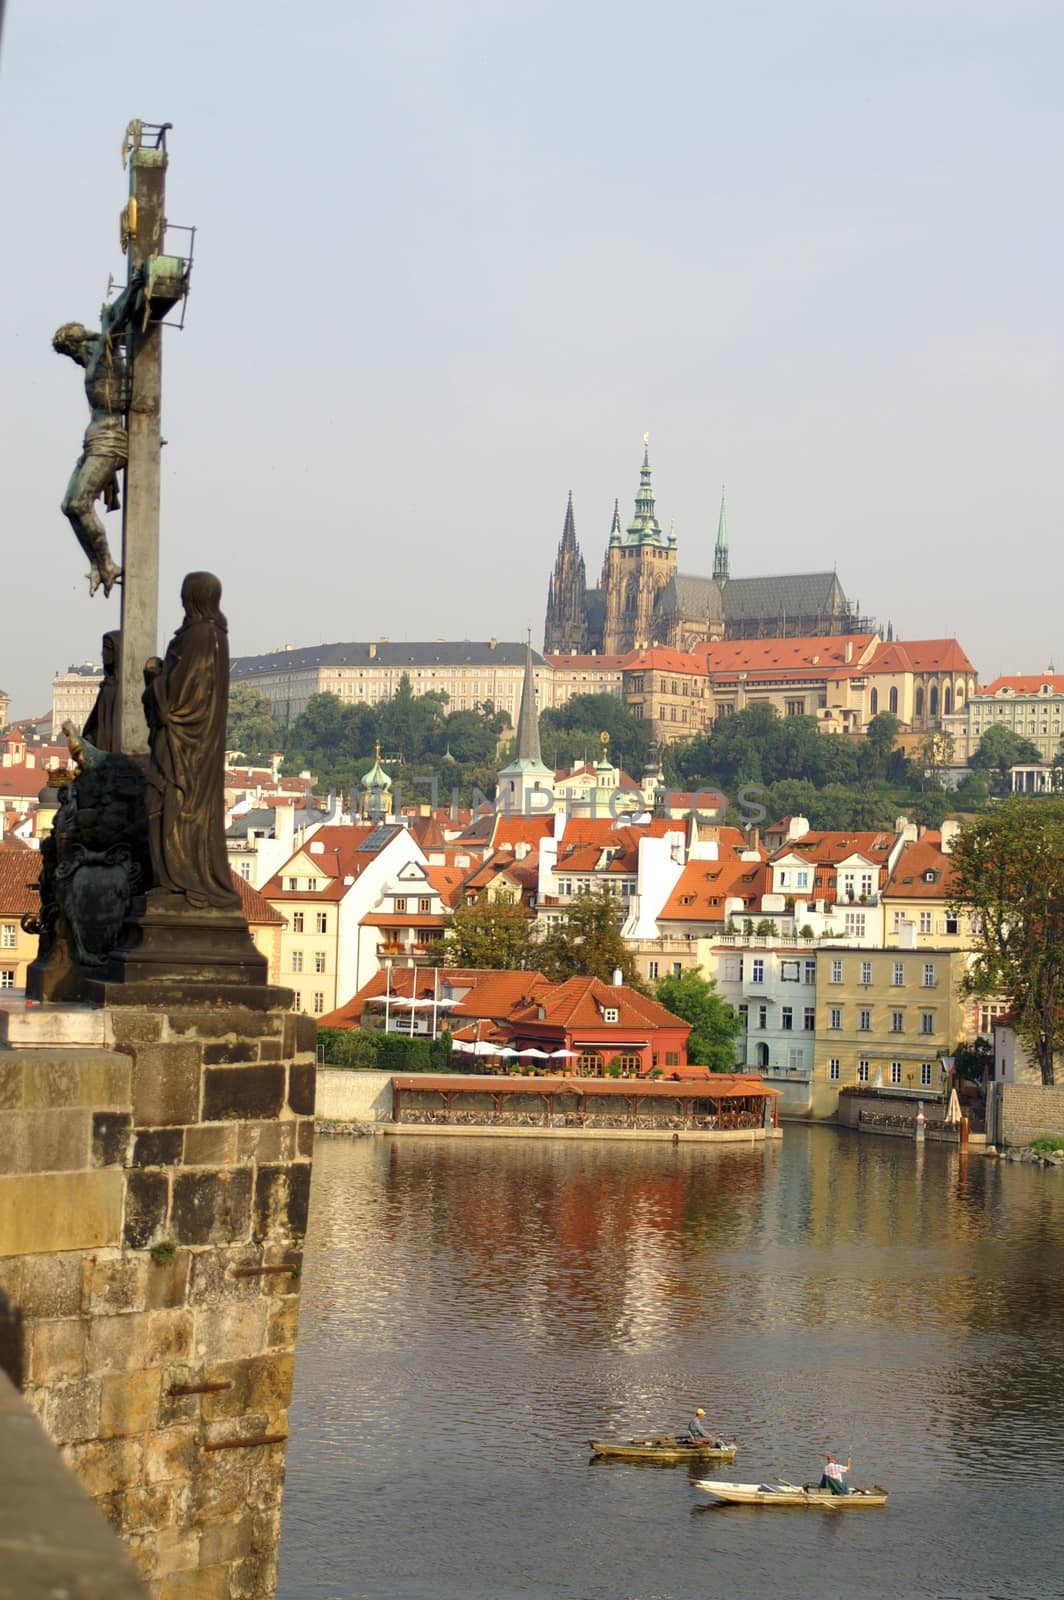 Statues of Charles bridge  and statues , jesus on the cross- beautiful scene in old prague city